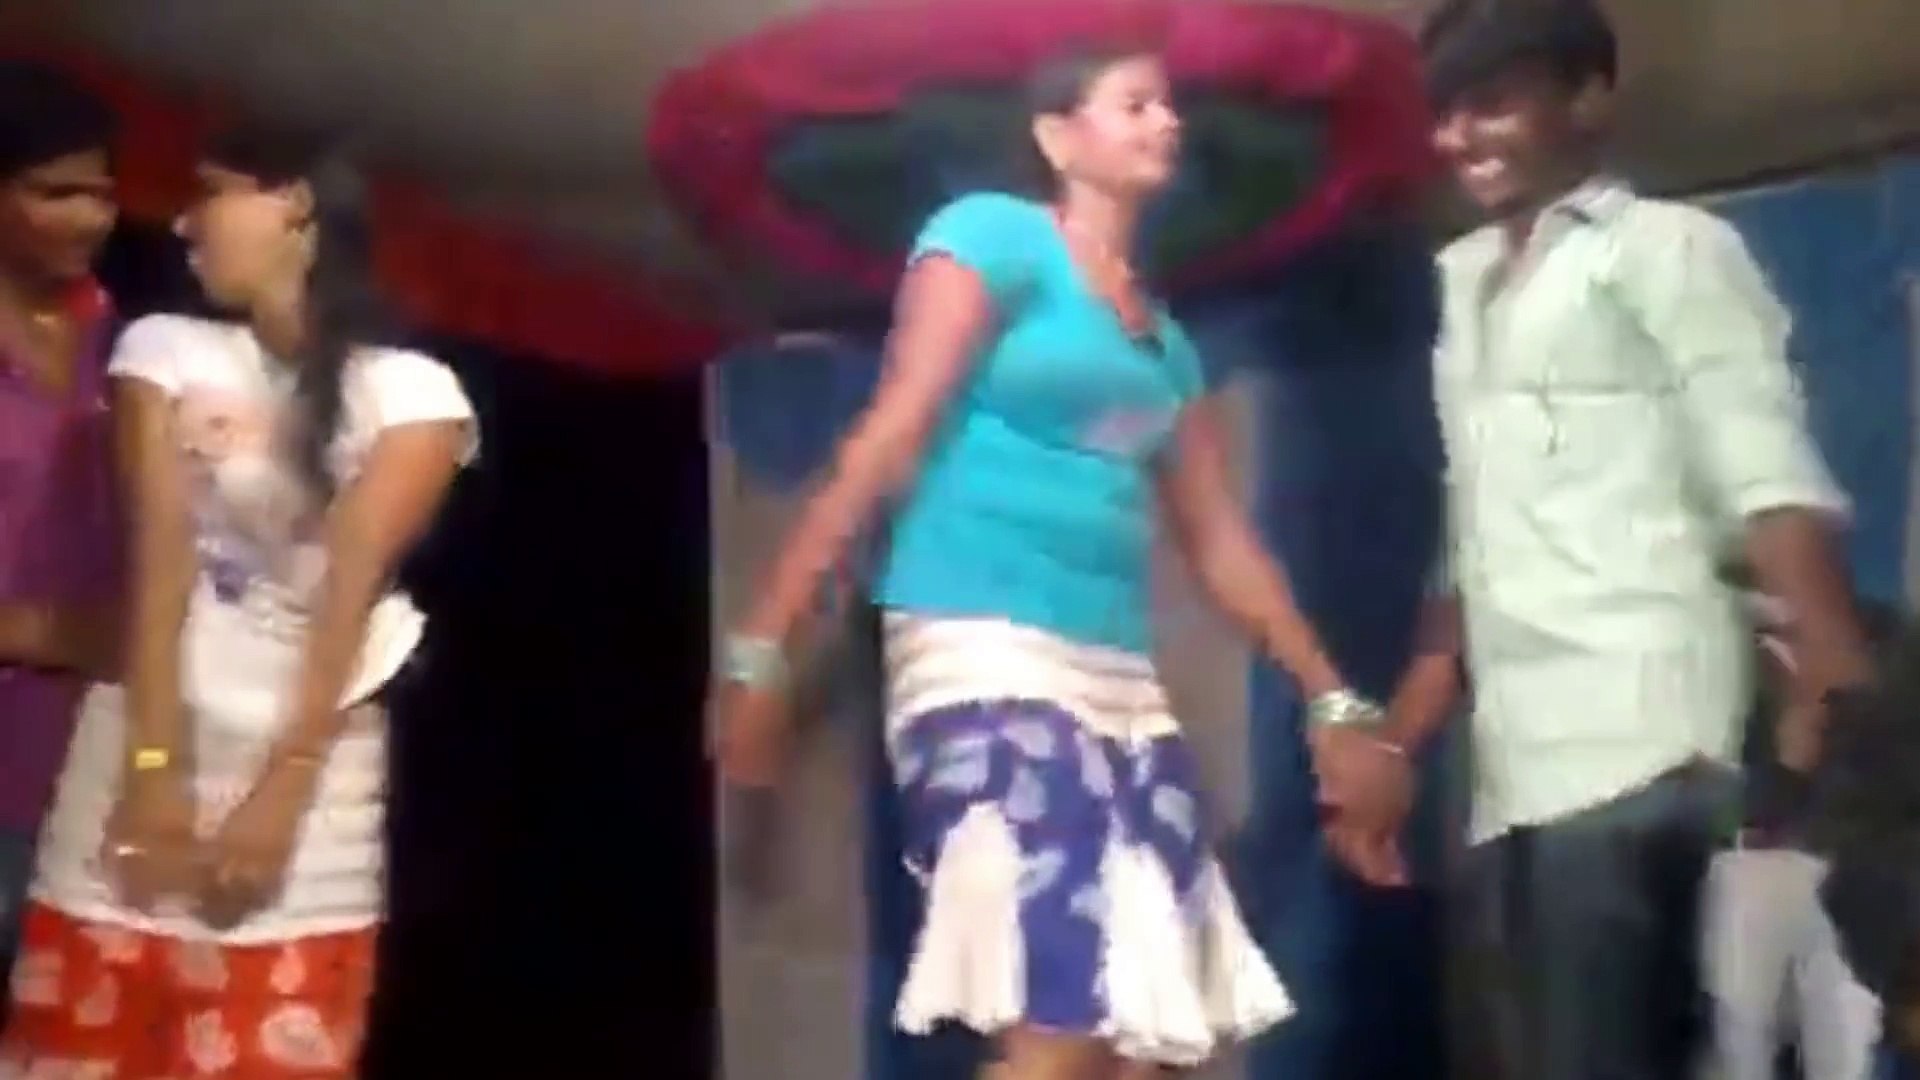 Telugu Hot Midnight Recording Dance New Video - Telugu Recording Dance 2017  || anakapalli,nellore,latest,hottest,Andhra,simhachalam,all,academy,amazing,adal  padal, - video Dailymotion